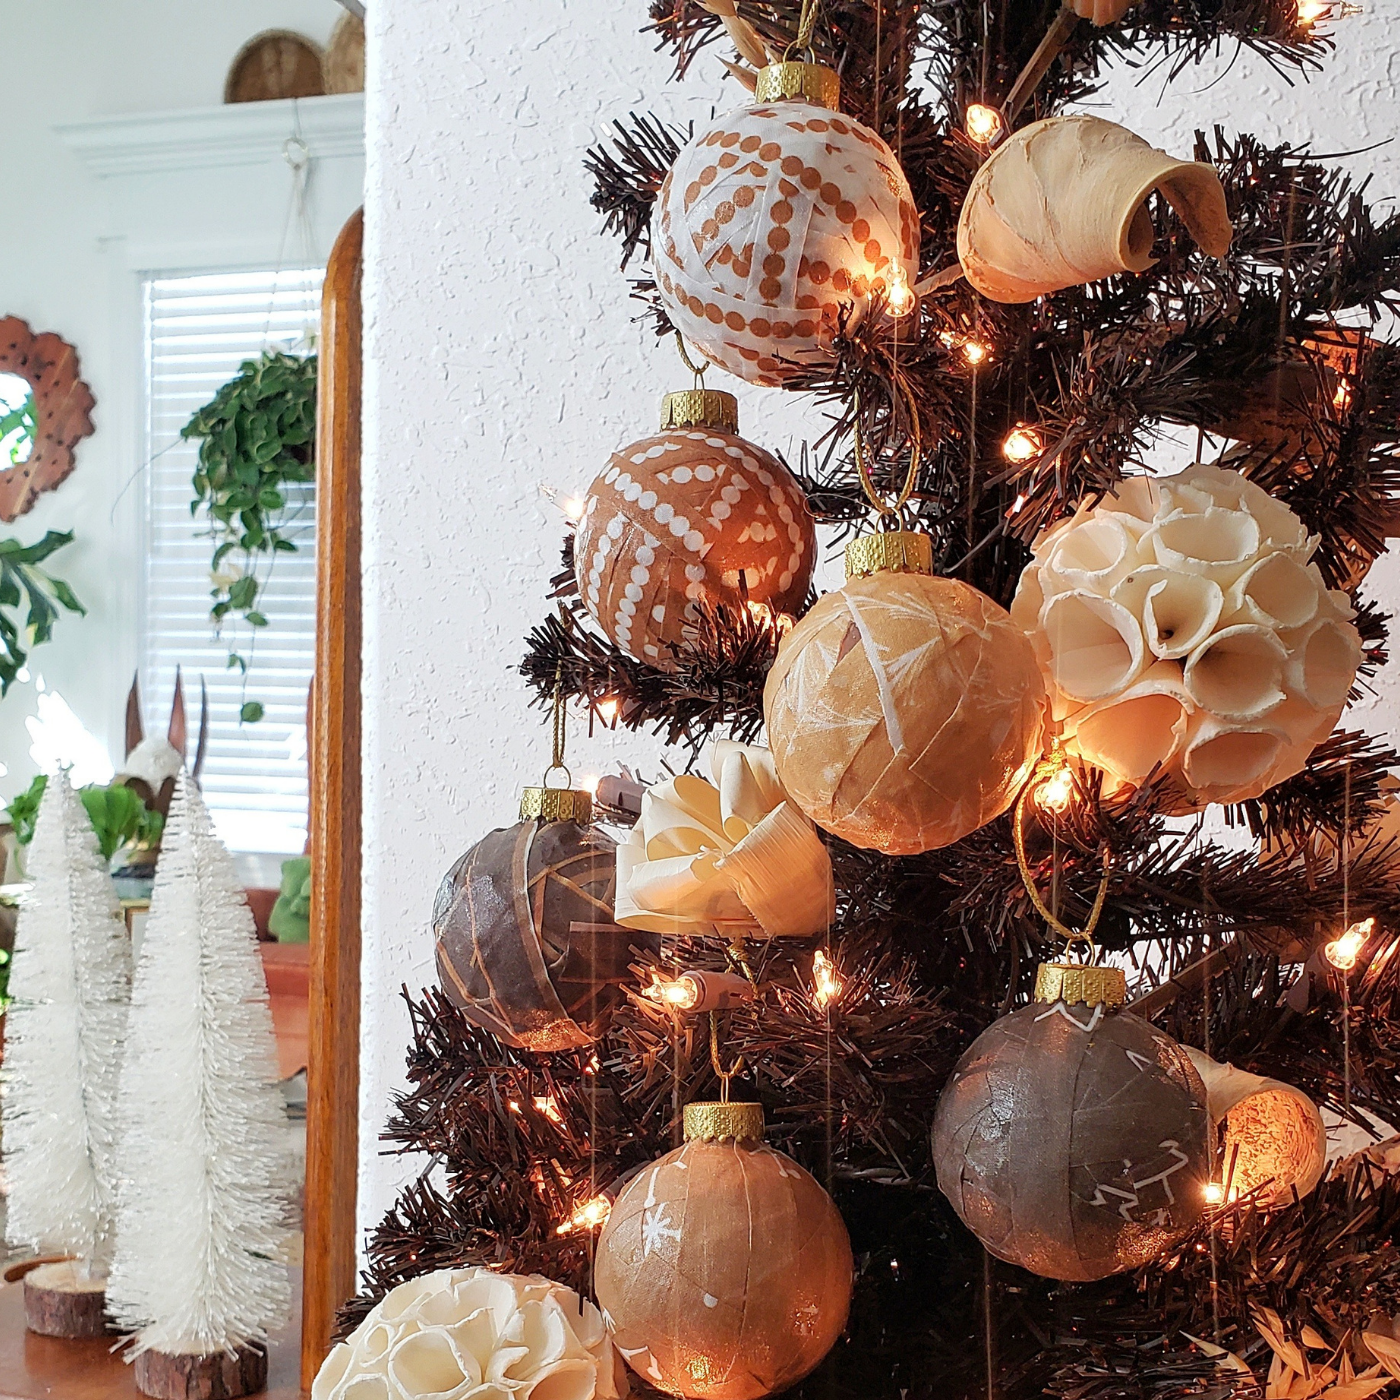 Round glass ornaments wrapped in strips of varying shades of brown fabric, some with white dots, some with white snowflakes, adorn a green fir tree with small warm golden lights.